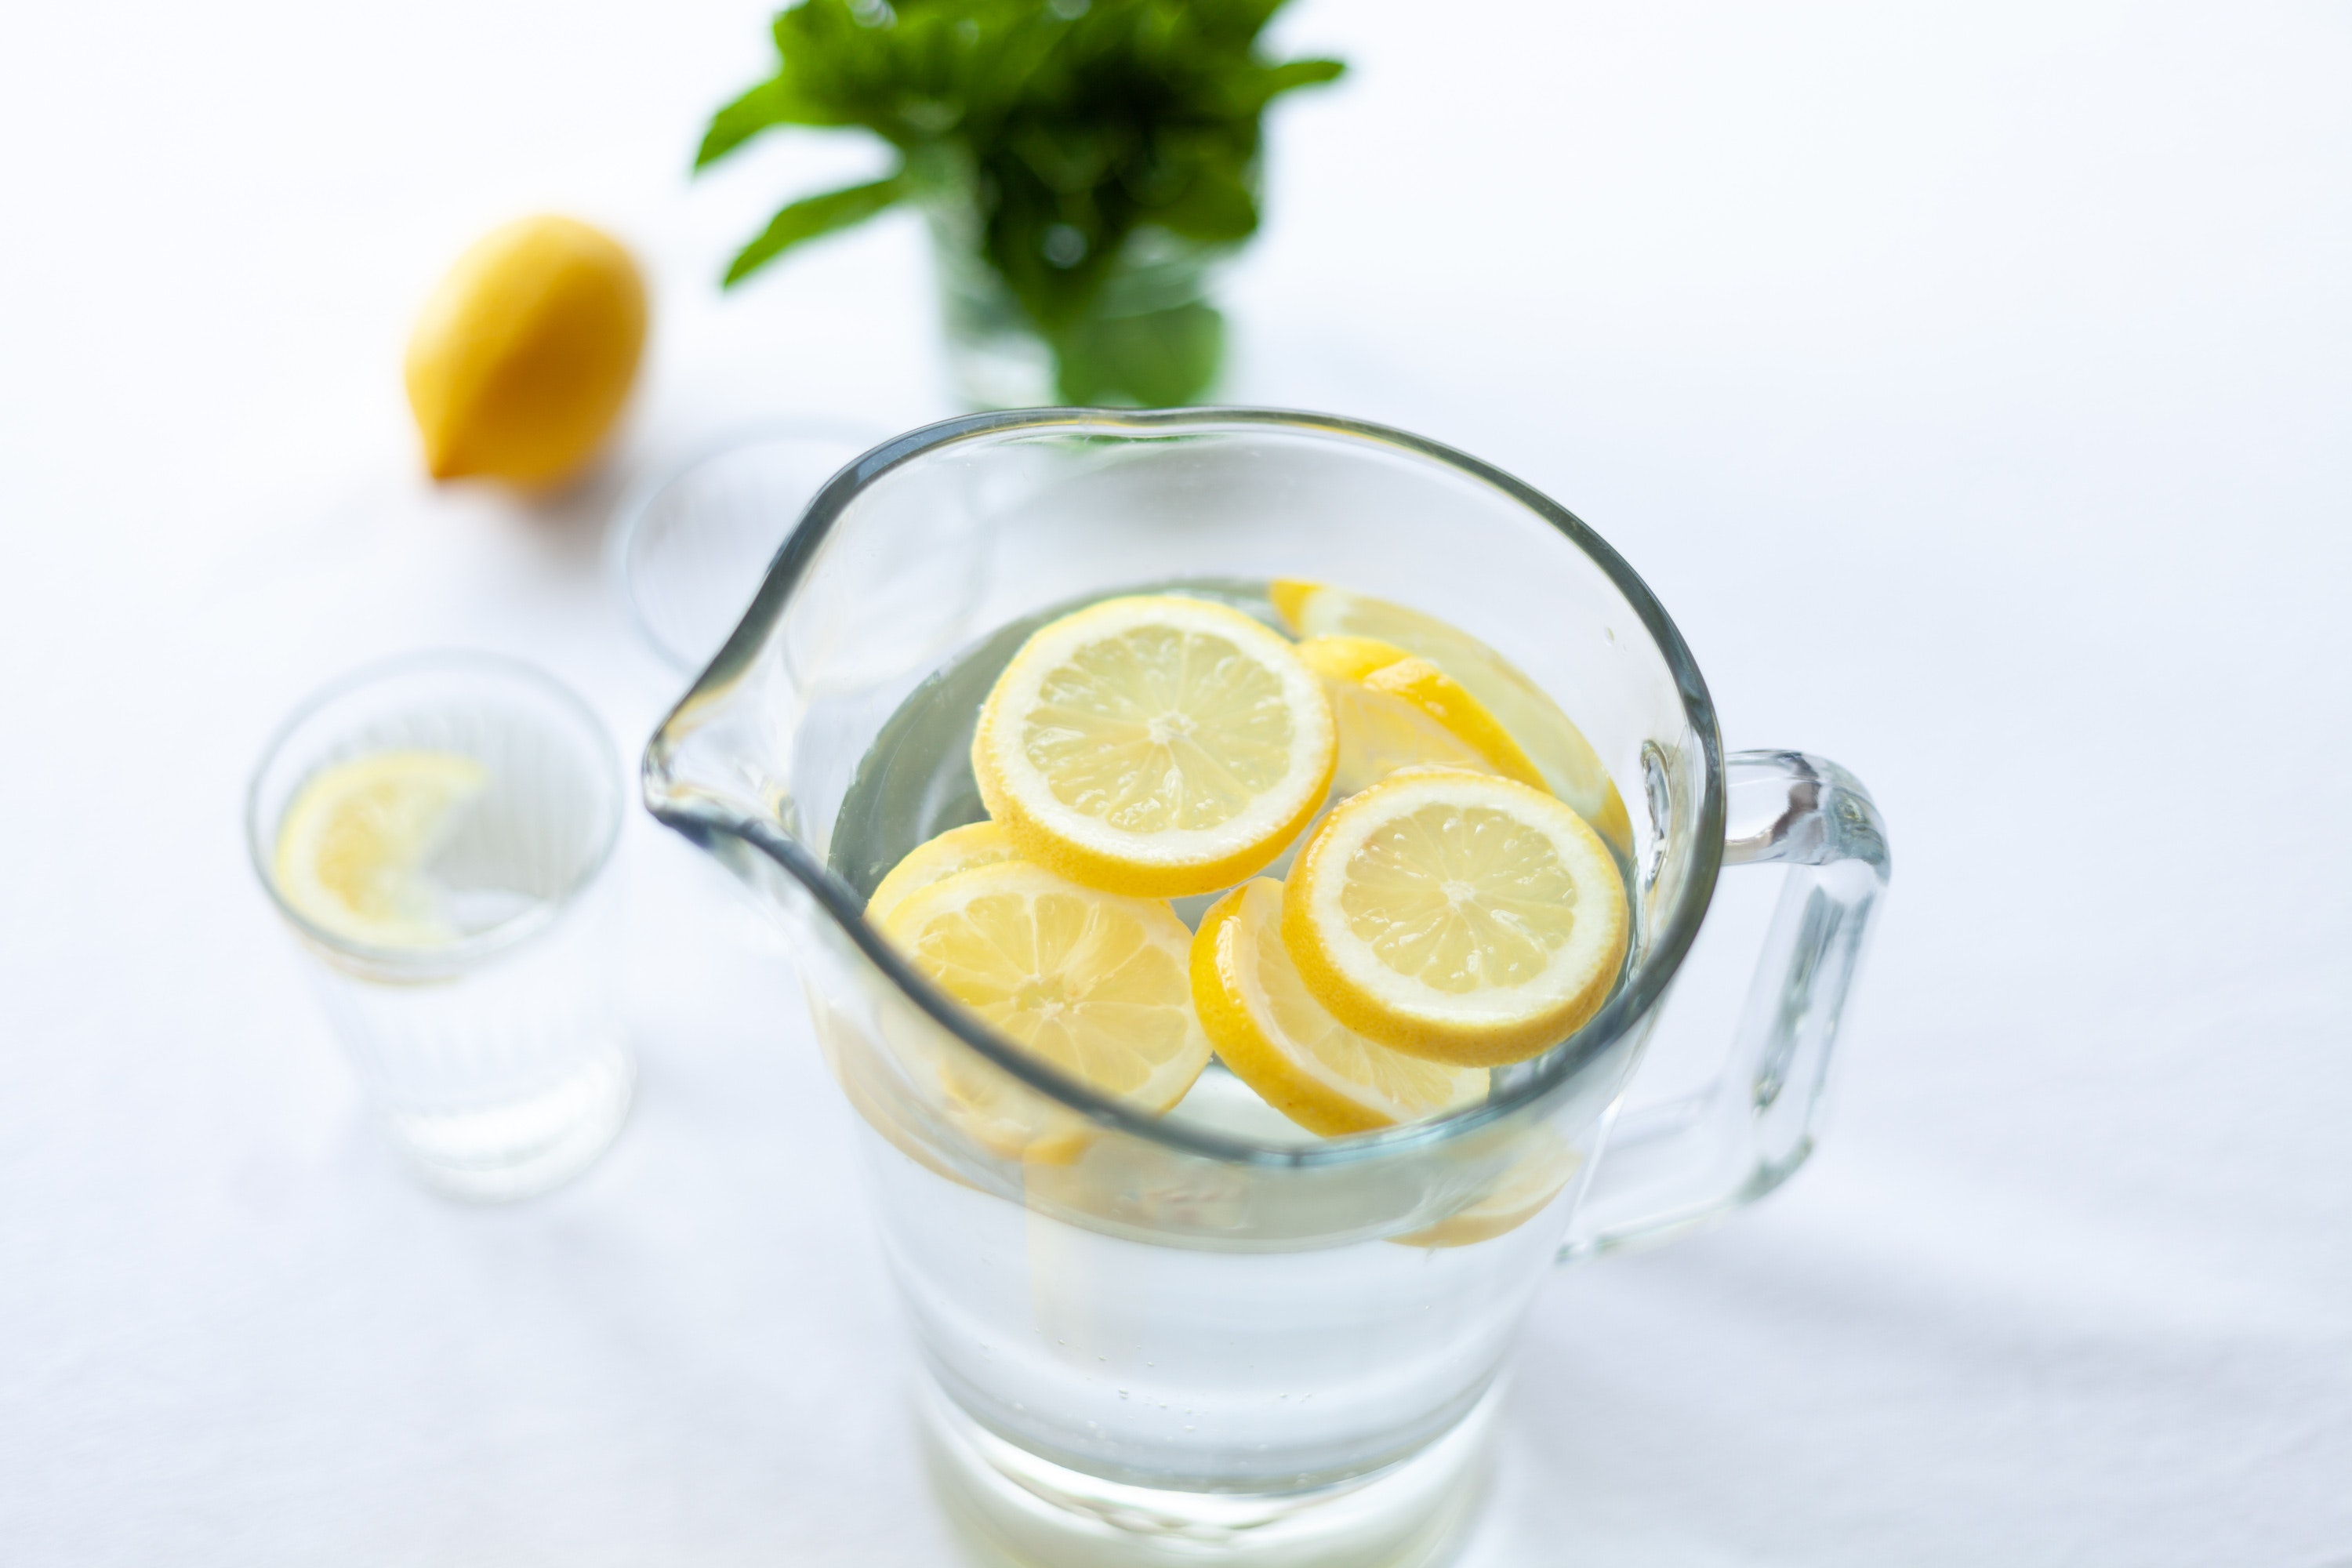 Pitcher of water with lemon